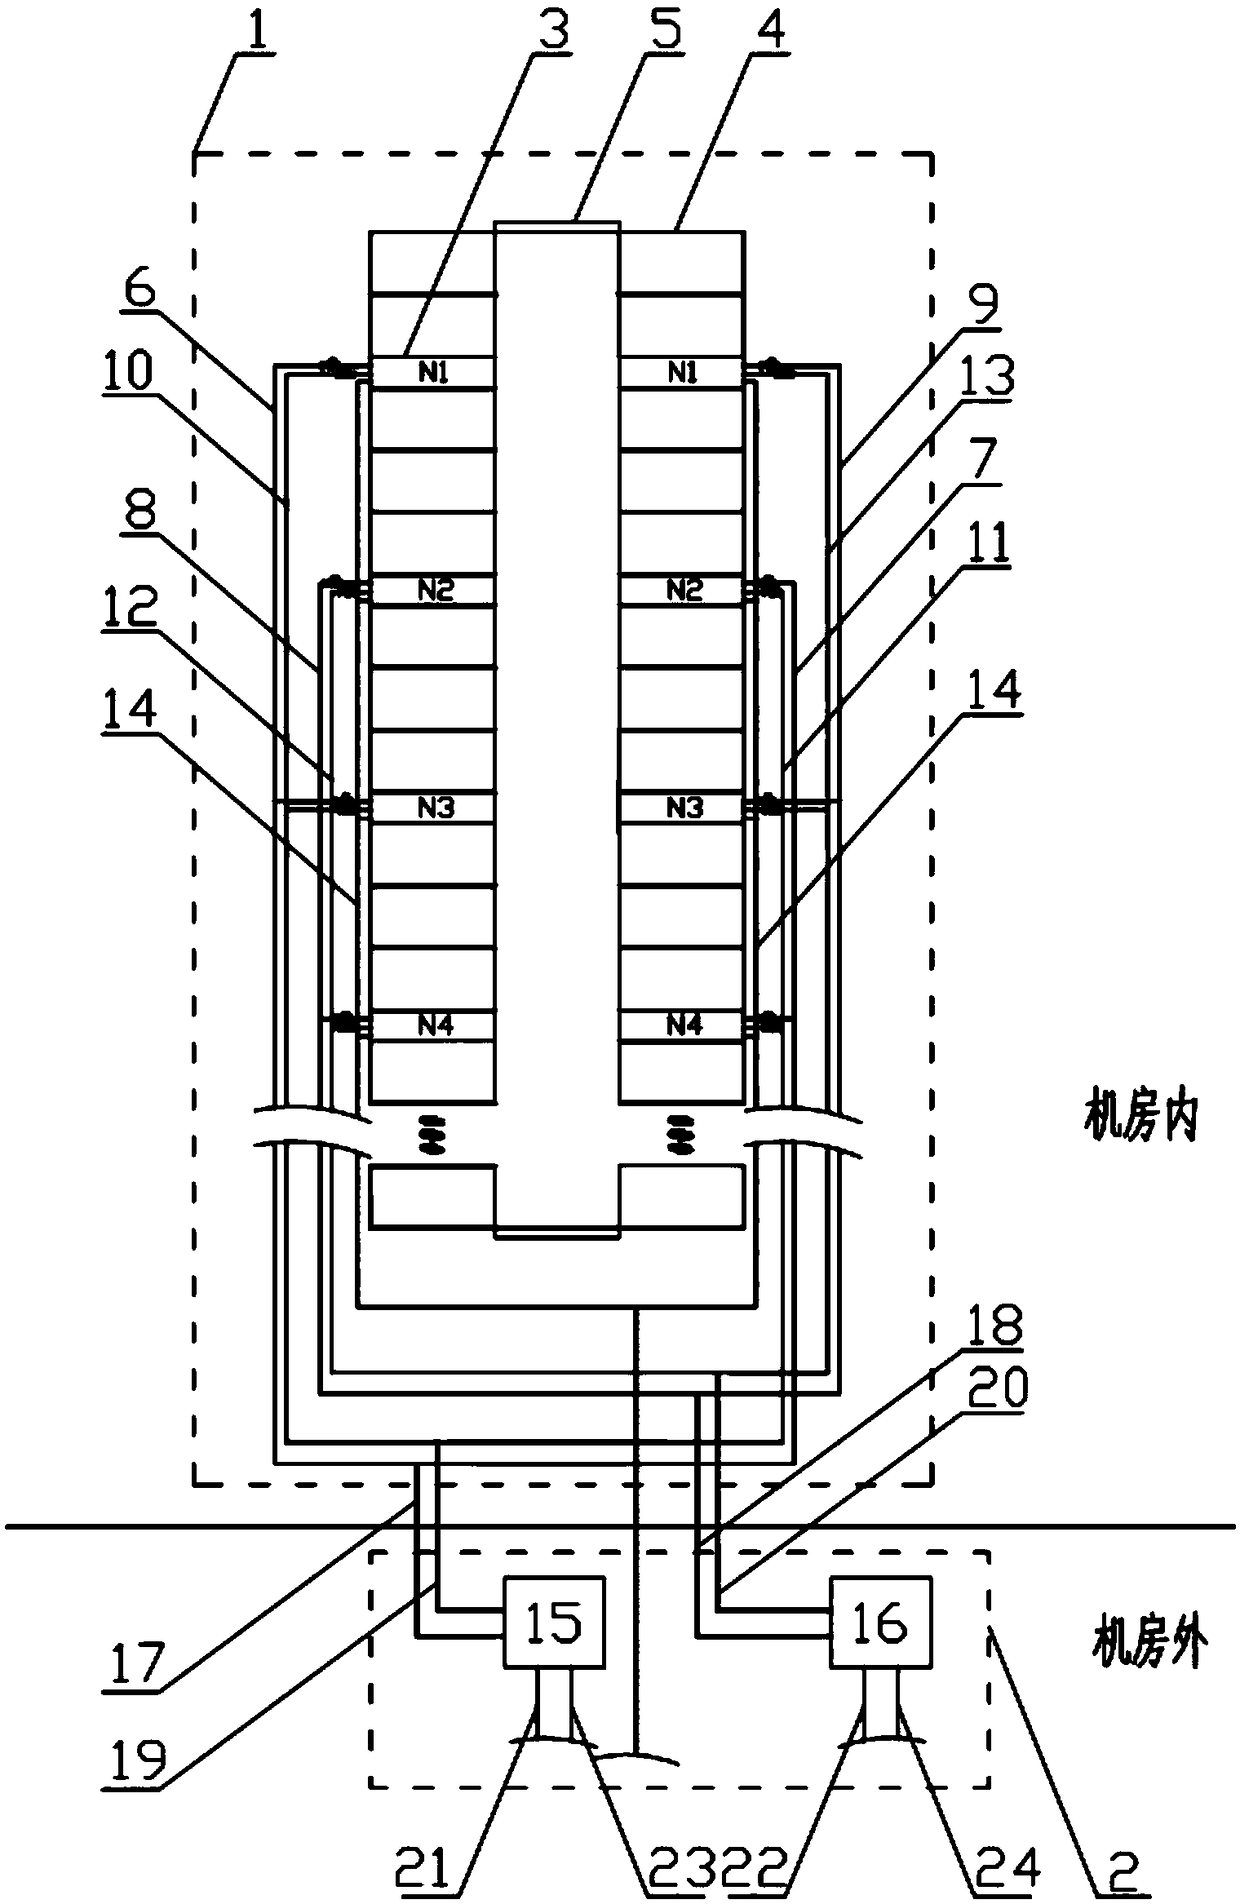 Power heat pipe inter-column air conditioning system